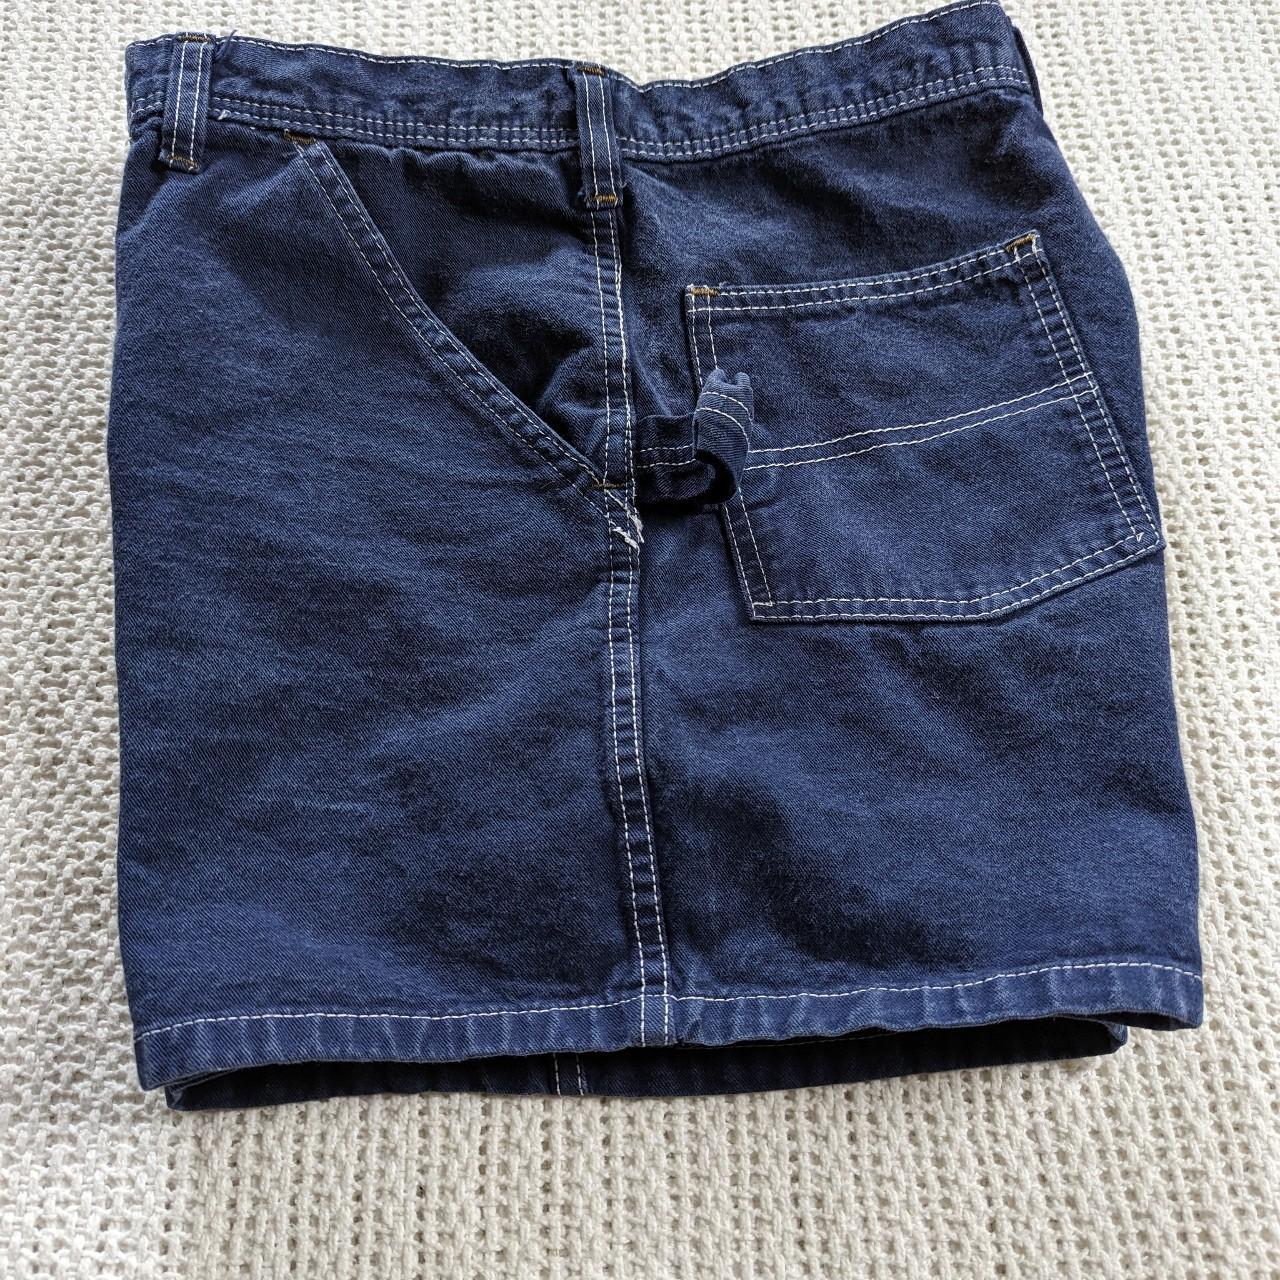 Carter's Women's White and Blue Shorts (4)